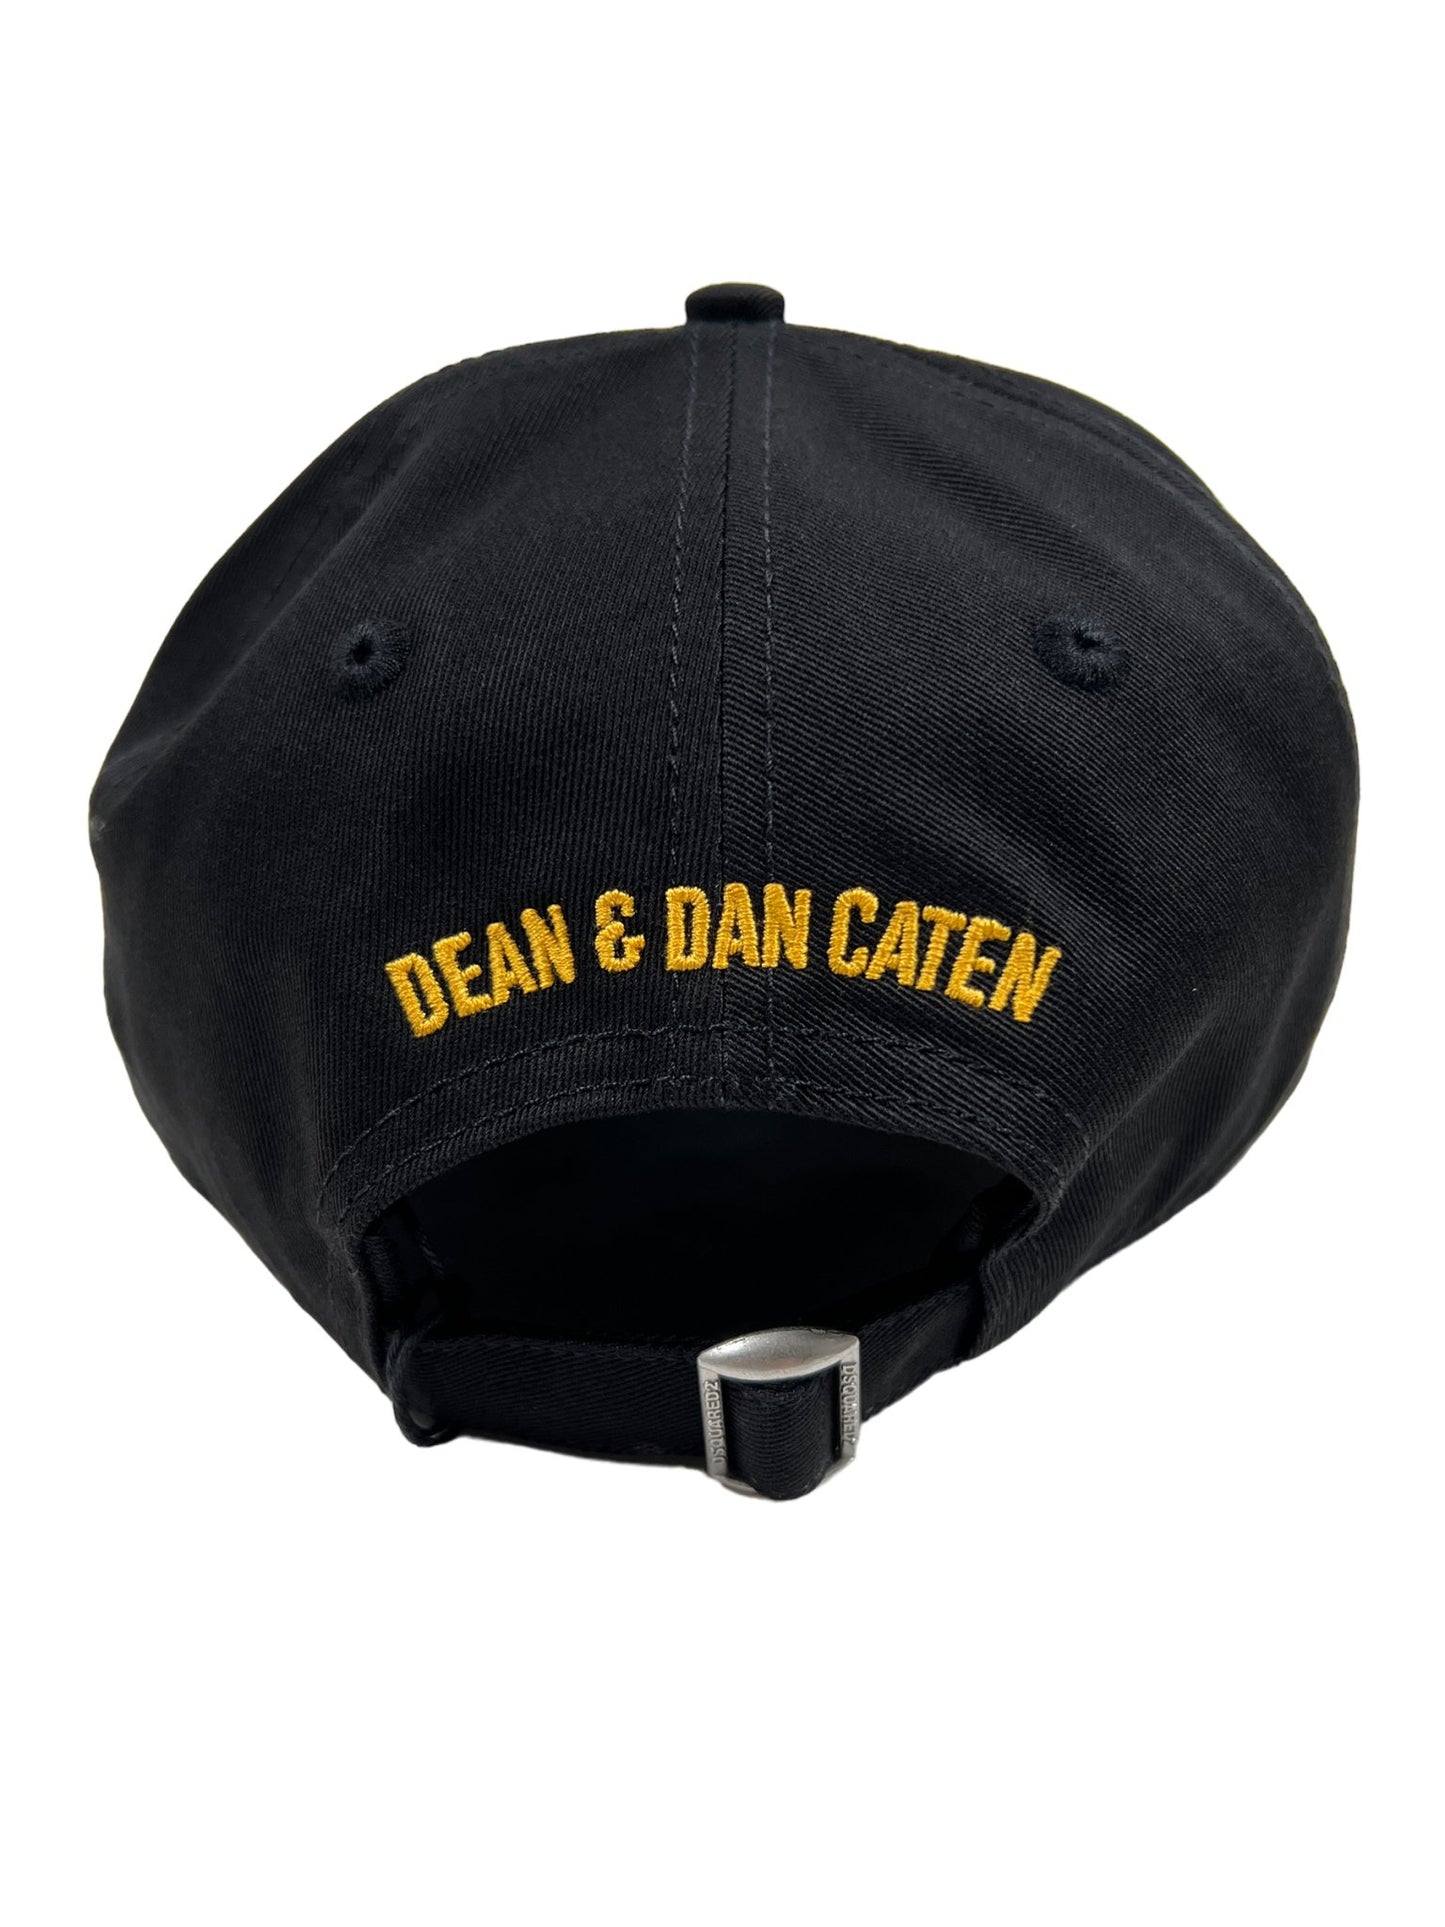 A black DSQUARED2 BCM0783 D2 logo baseball cap gabardine -Nero, with the words Dean and Dan Caten on it, embodying fashion.